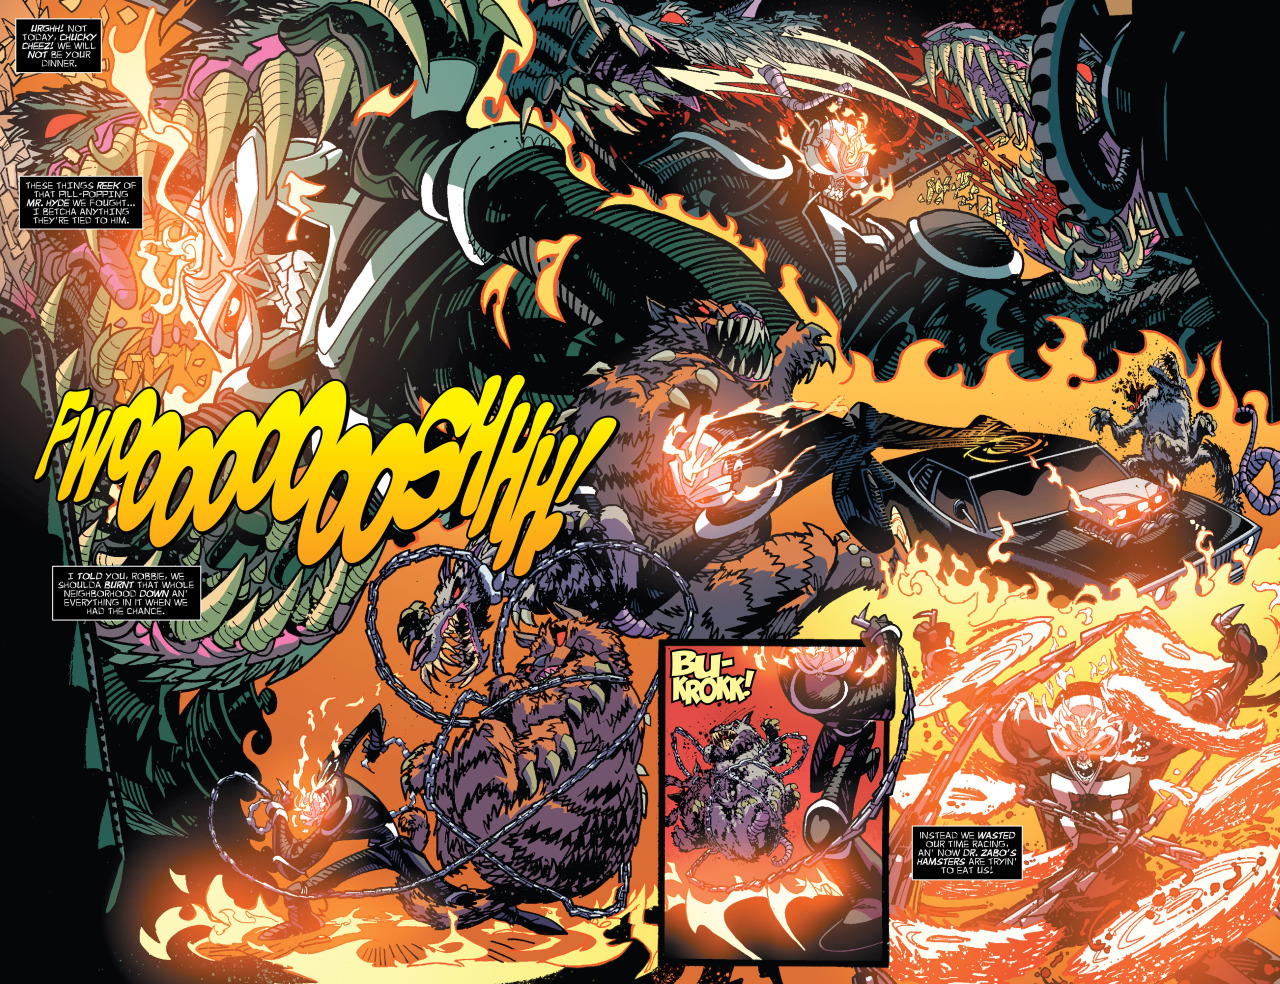 I think Damion Scott is going to pull off the big Ghost Rider fight/team-up next